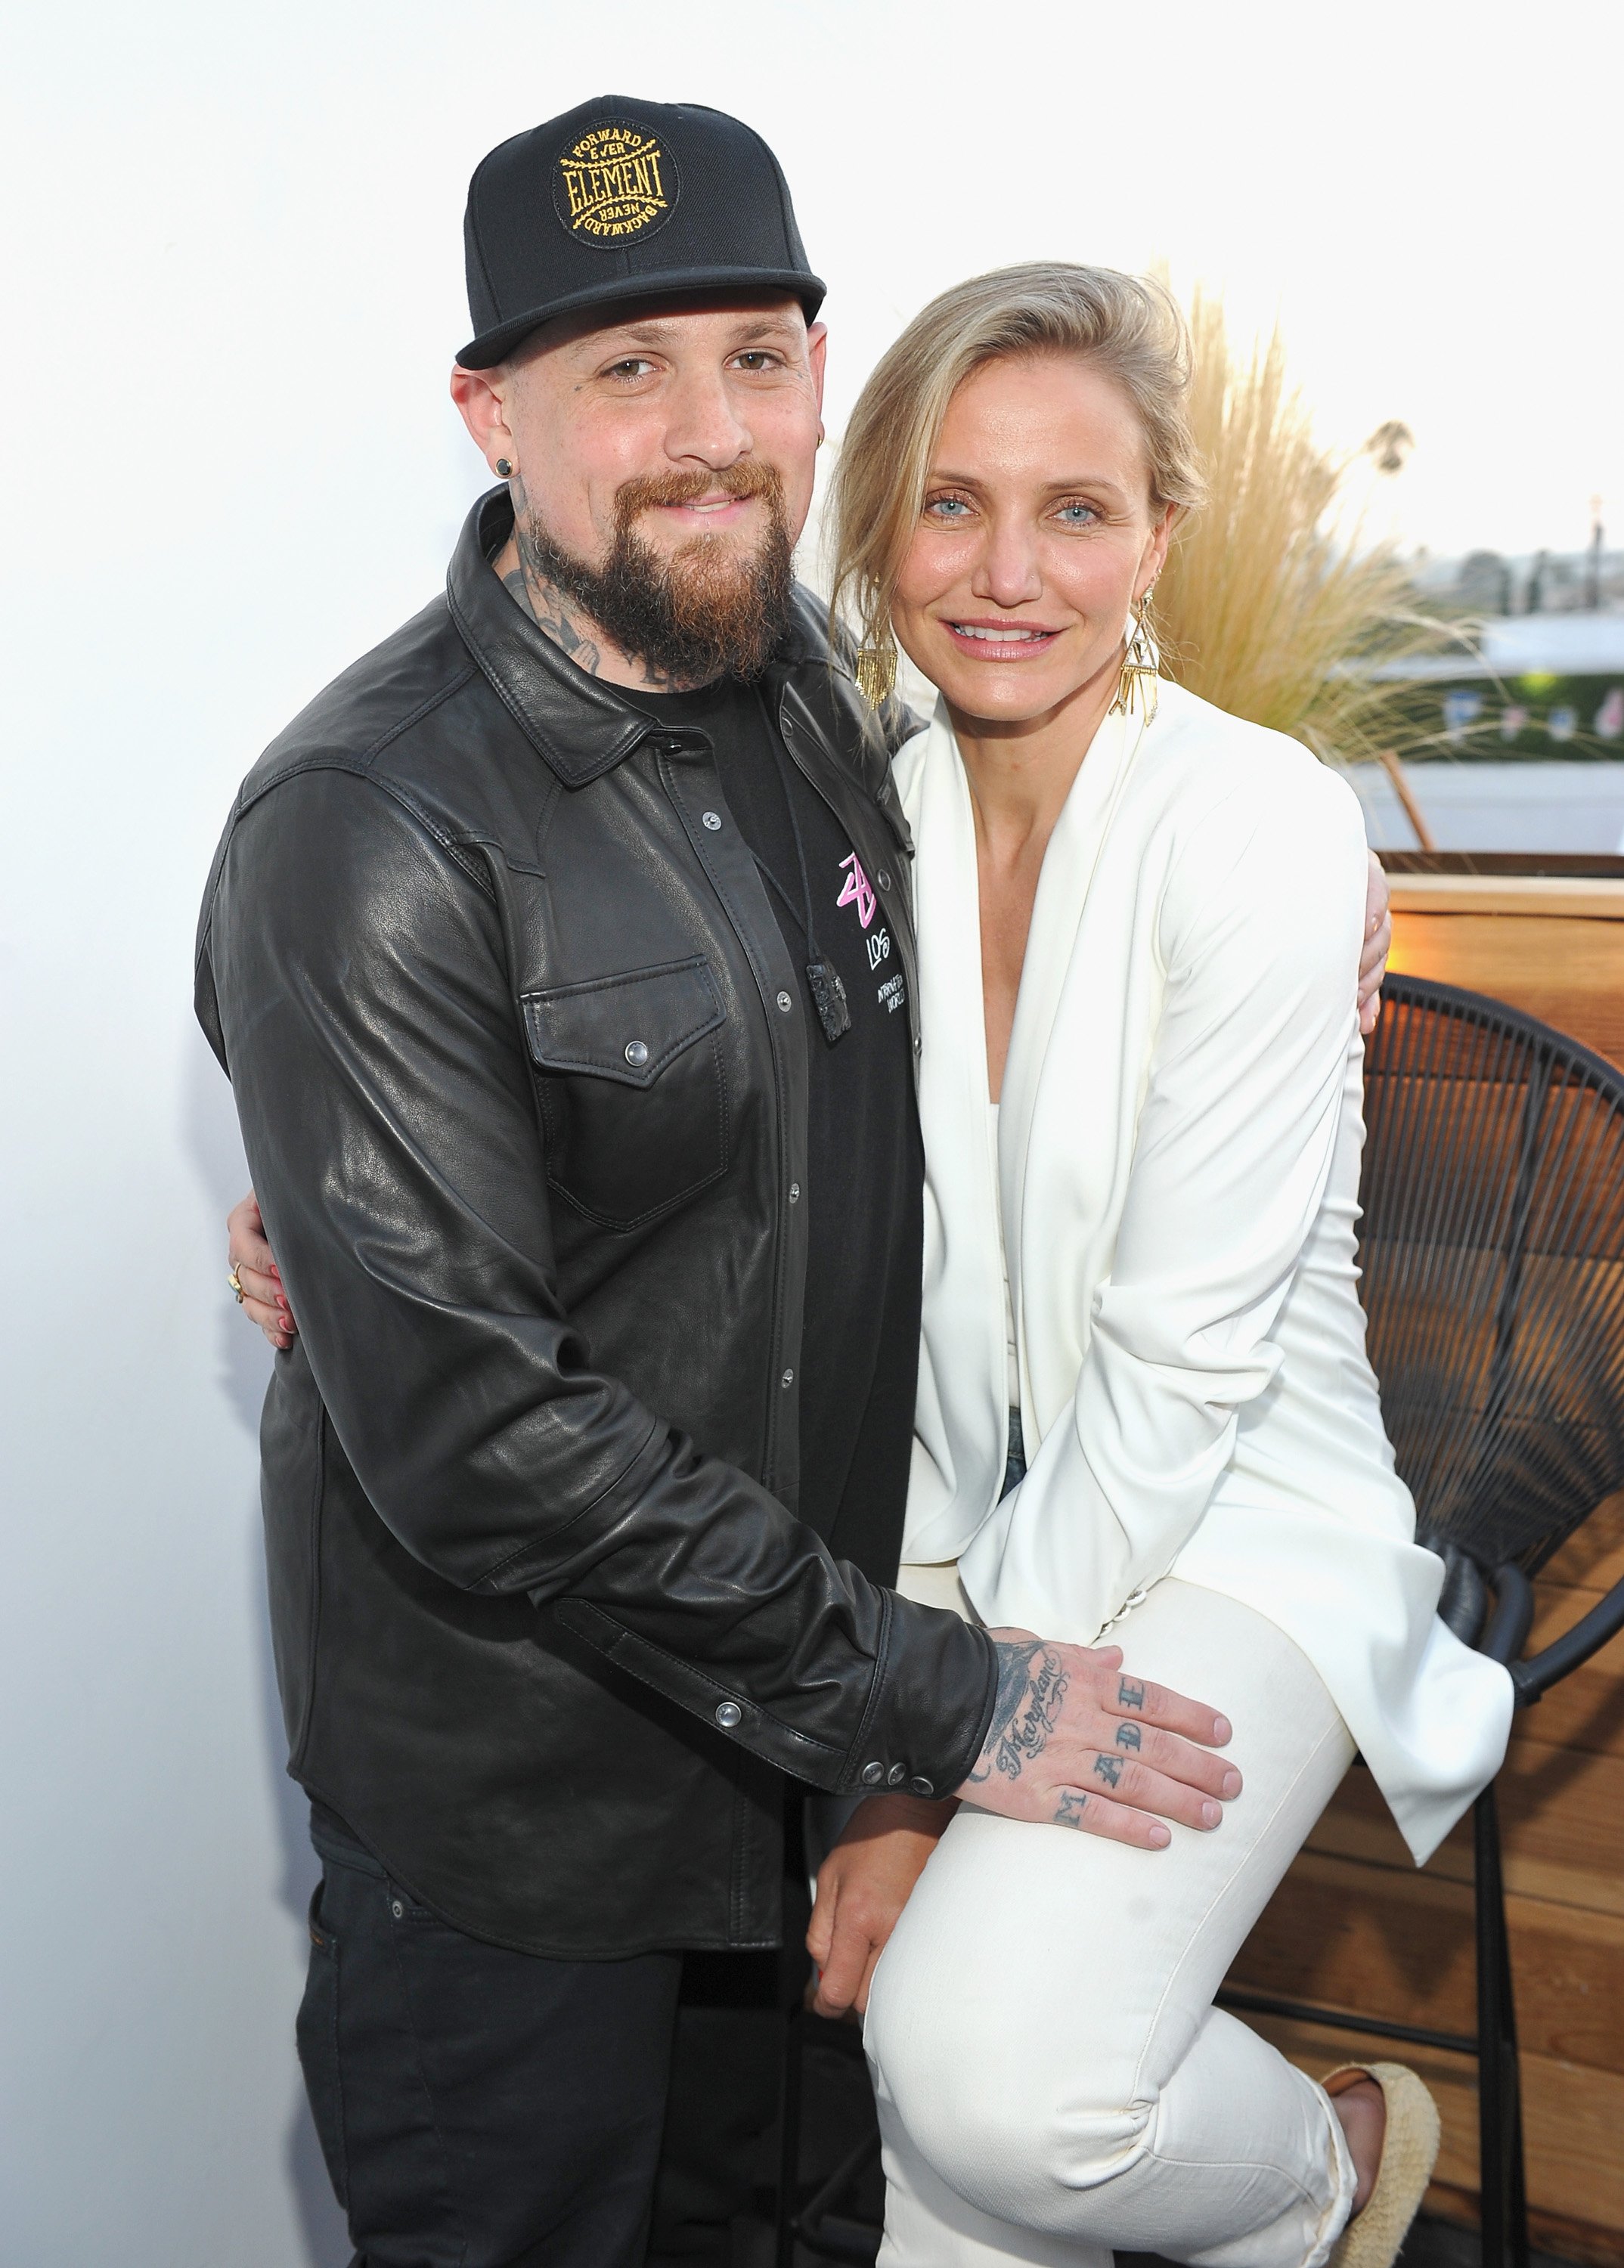 Guitarist Benji Madden and his wife Cameron Diaz attending House of Harlow 1960 x REVOLVE on June 2, 2016 in Los Angeles, California. | Source: Getty Images